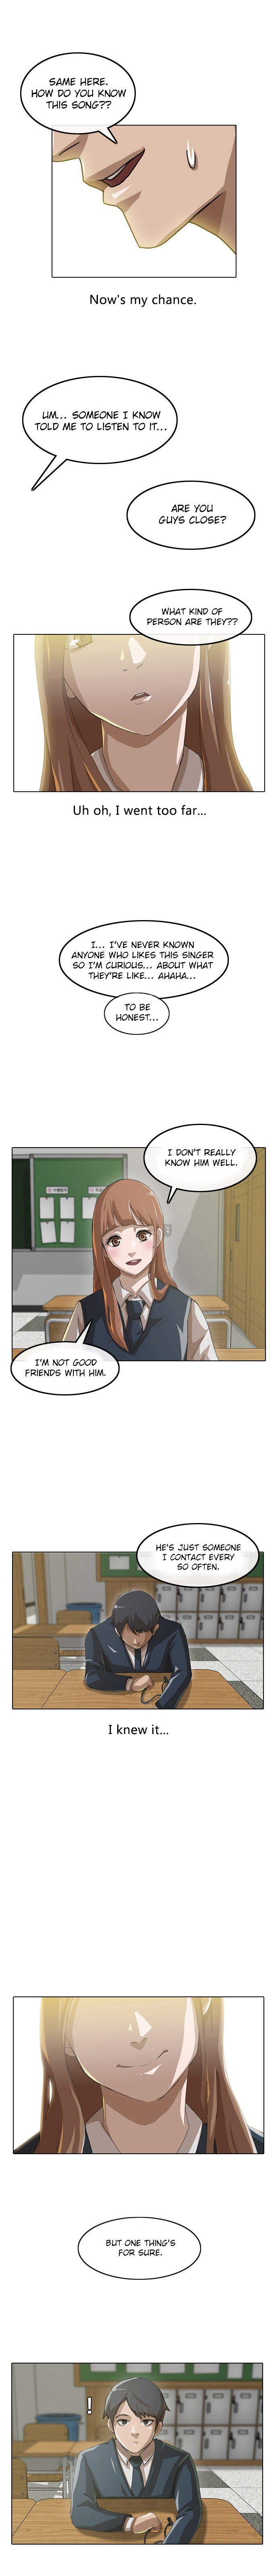 The Girl from Random Chatting! Vol. 1 Ch. 3 Her Change